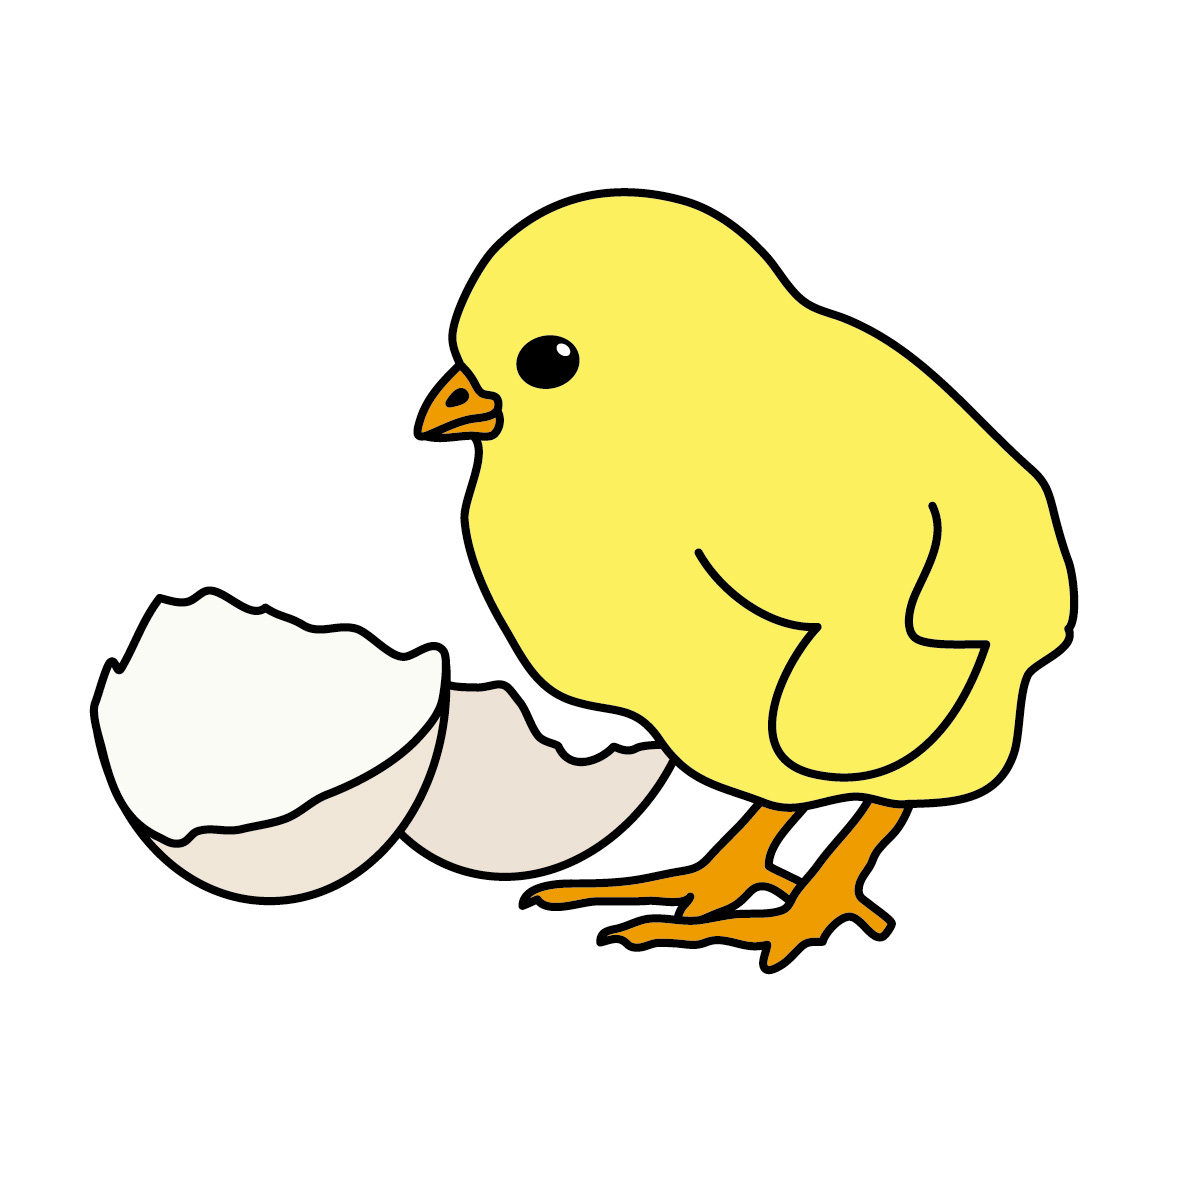 Baby Chick Royalty Free Stock